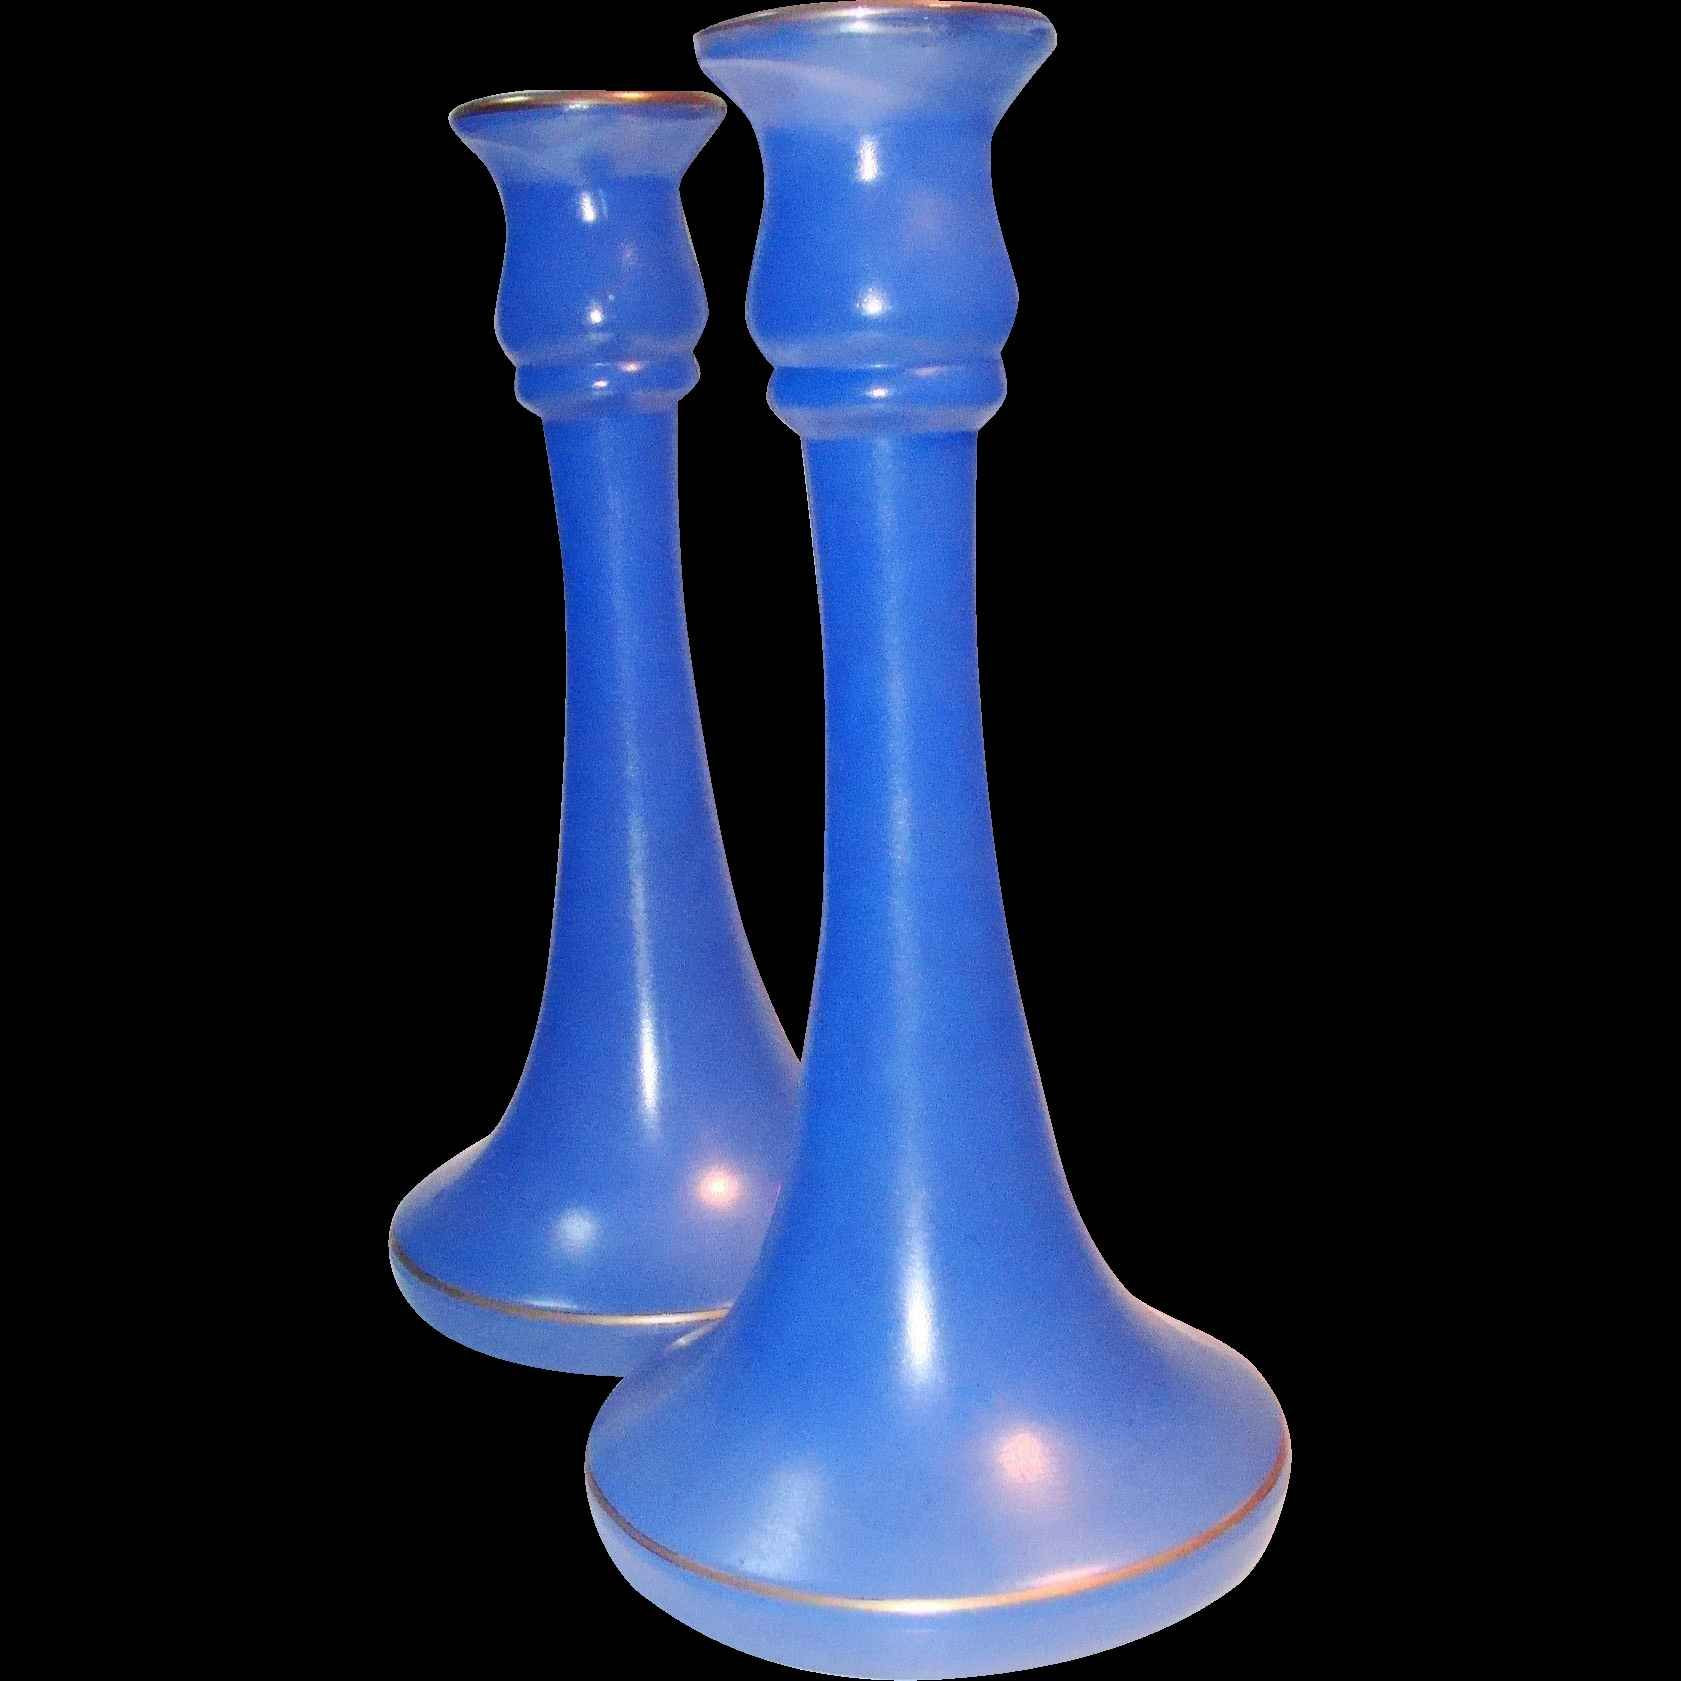 21 Lovable Mini Colored Glass Vases 2024 free download mini colored glass vases of 37 fenton blue glass vase the weekly world regarding 37 fenton blue glass vase